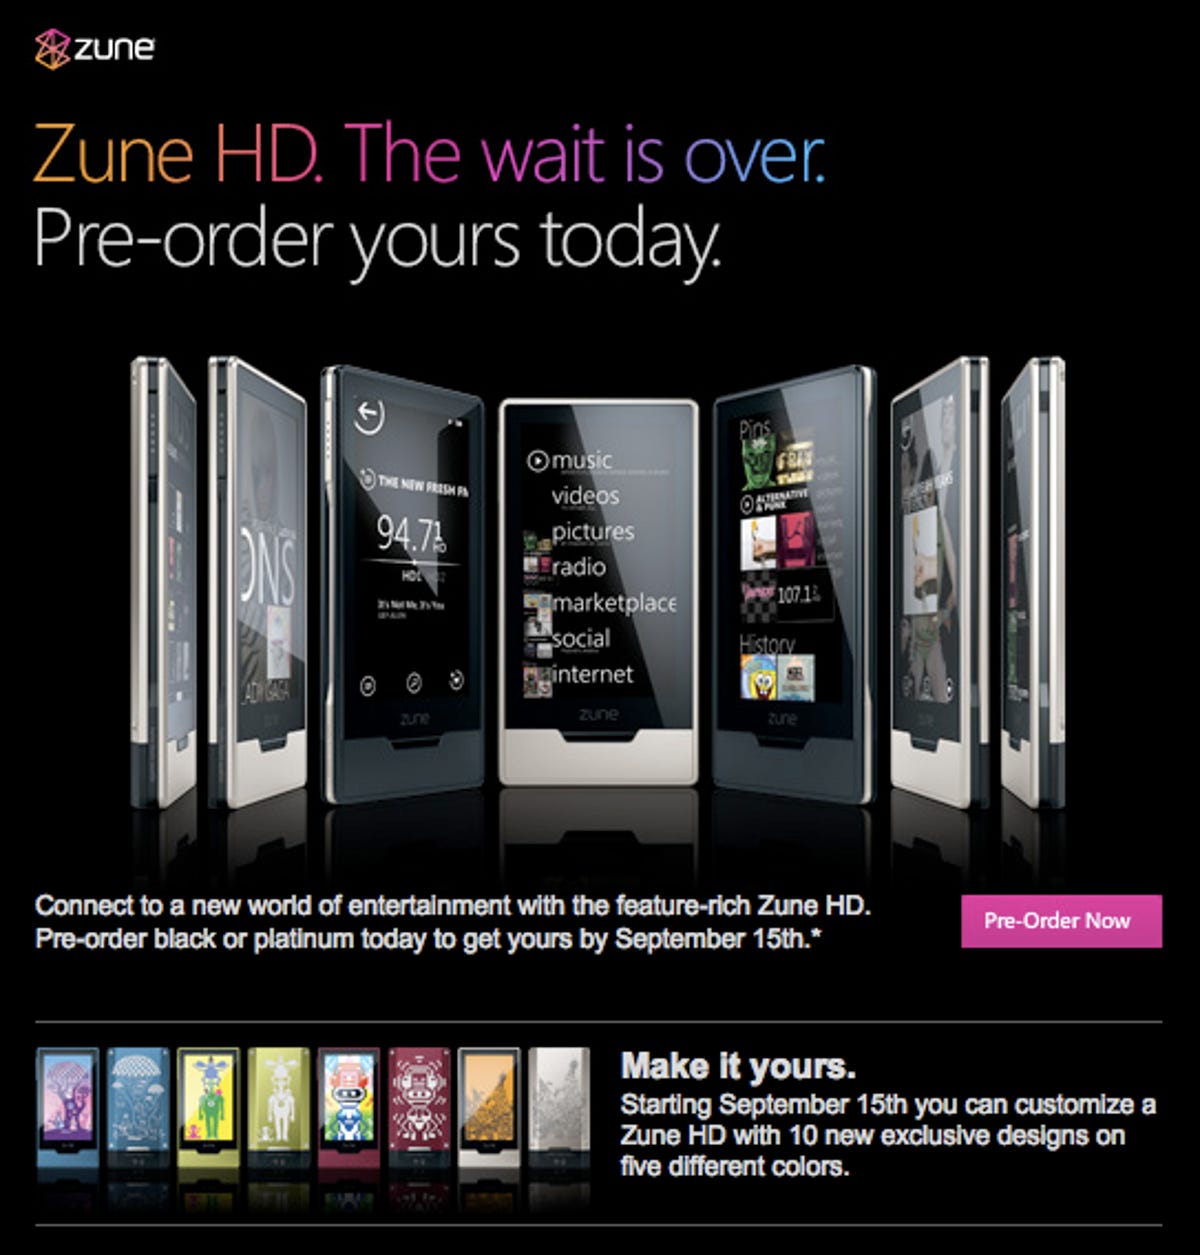 Image of Zune HD pre-order advertisment.